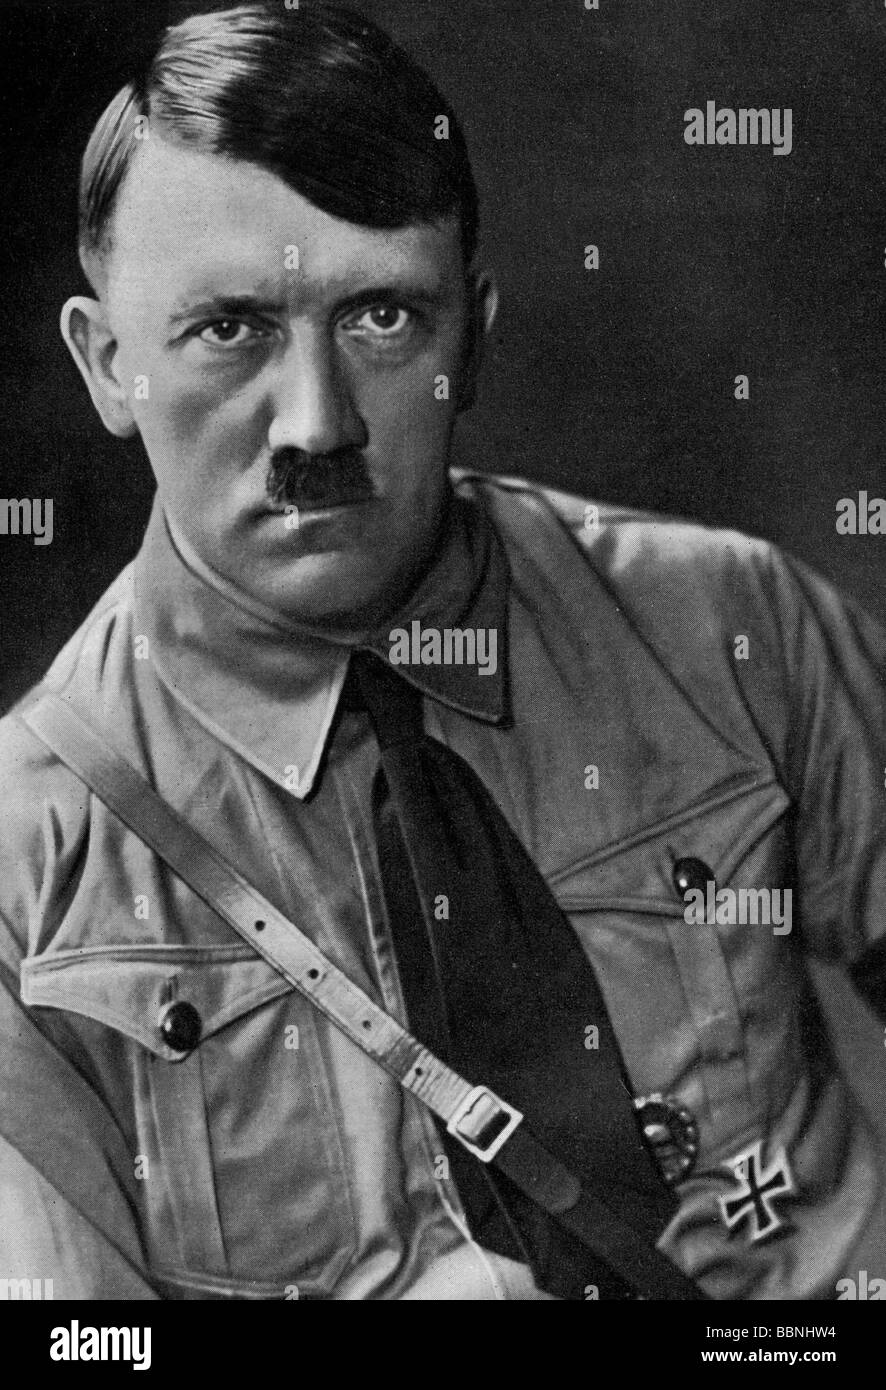 Hitler, Adolf, 20.4.1889 - 30.4.1945, German politician (NSDAP), Fuehrer and Reich Chancellor 30.1.1933 - 30.4.1945, portrait, wearing Nazi party uniform, early 1930s, Stock Photo